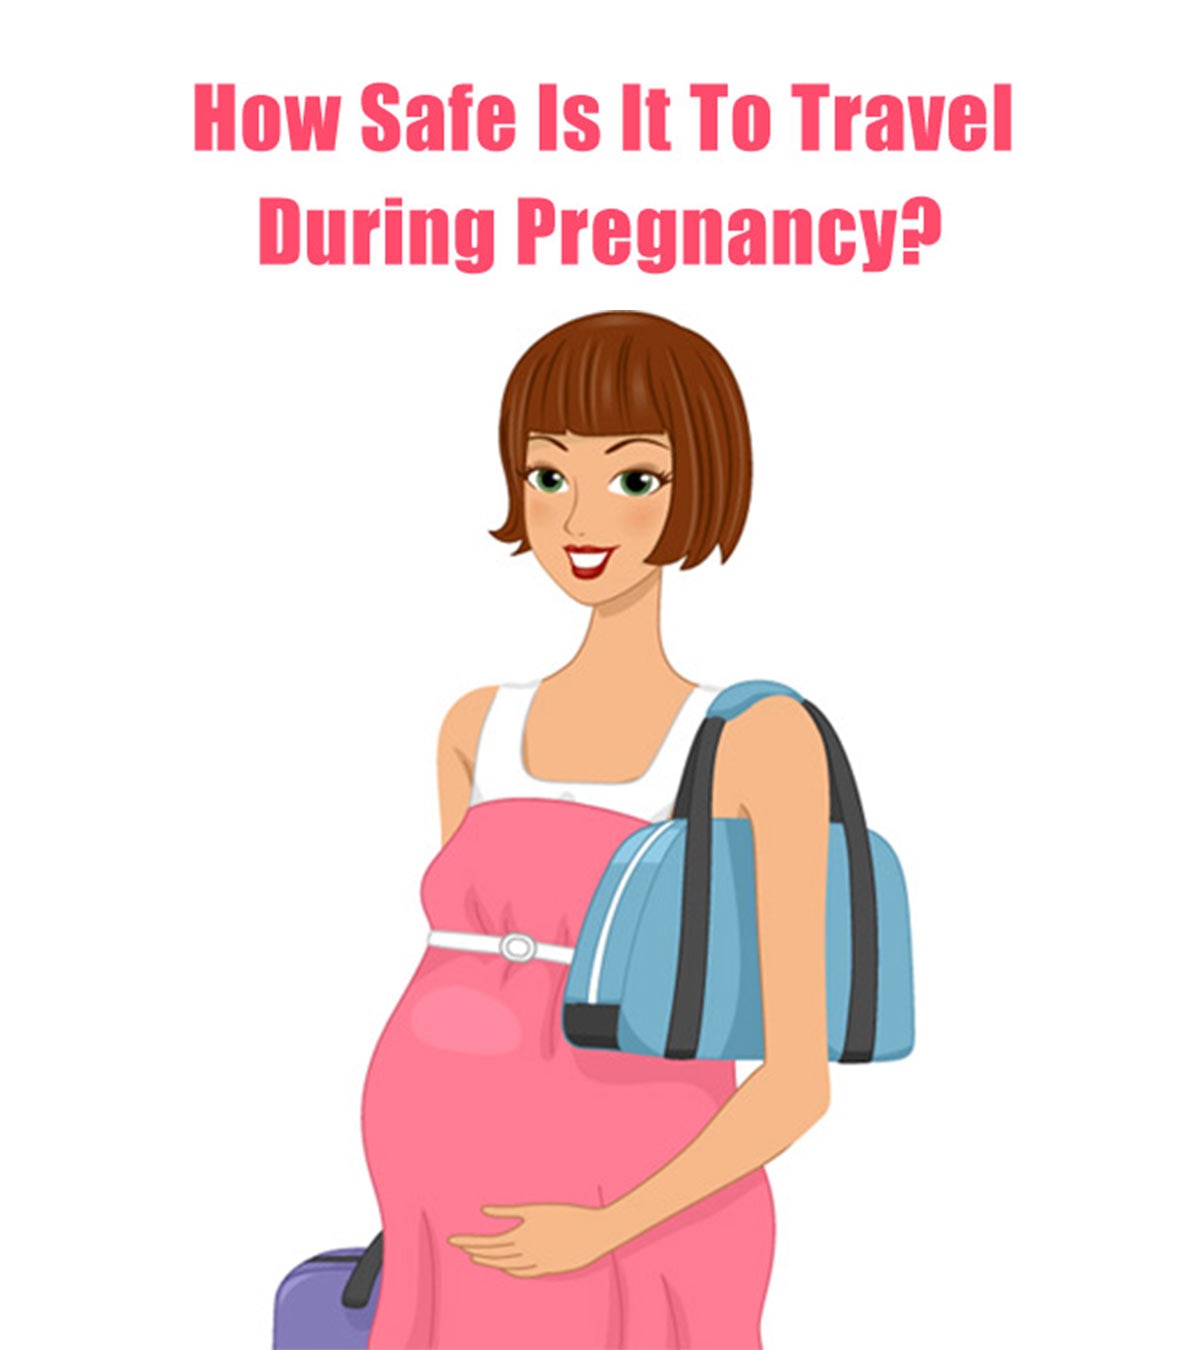 Pregnant Woman Traveling Safely